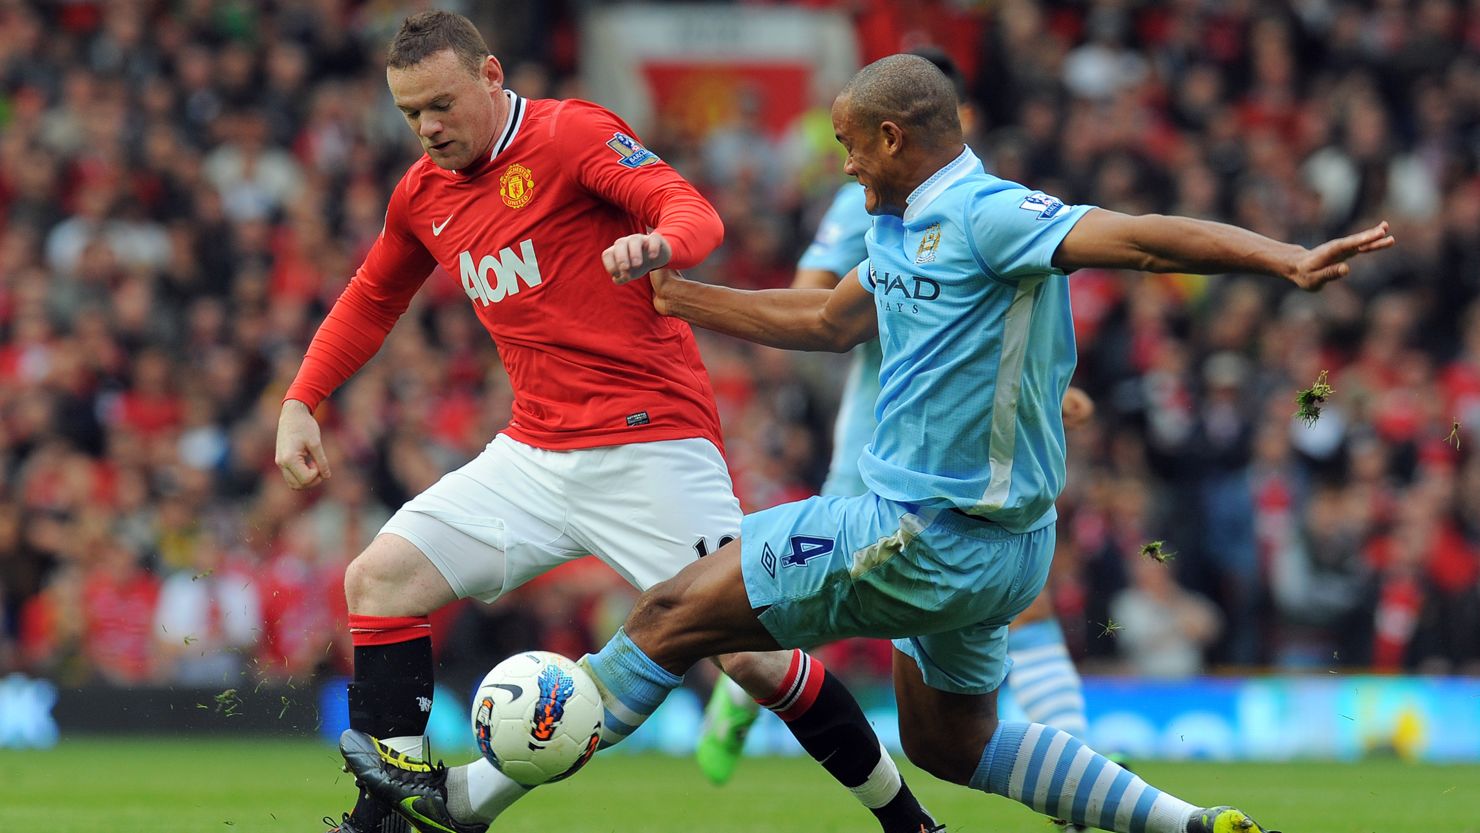 Wayne Rooney, left, and Vincent Kompany did battle in October's Manchester derby, which City won handily 6-1.